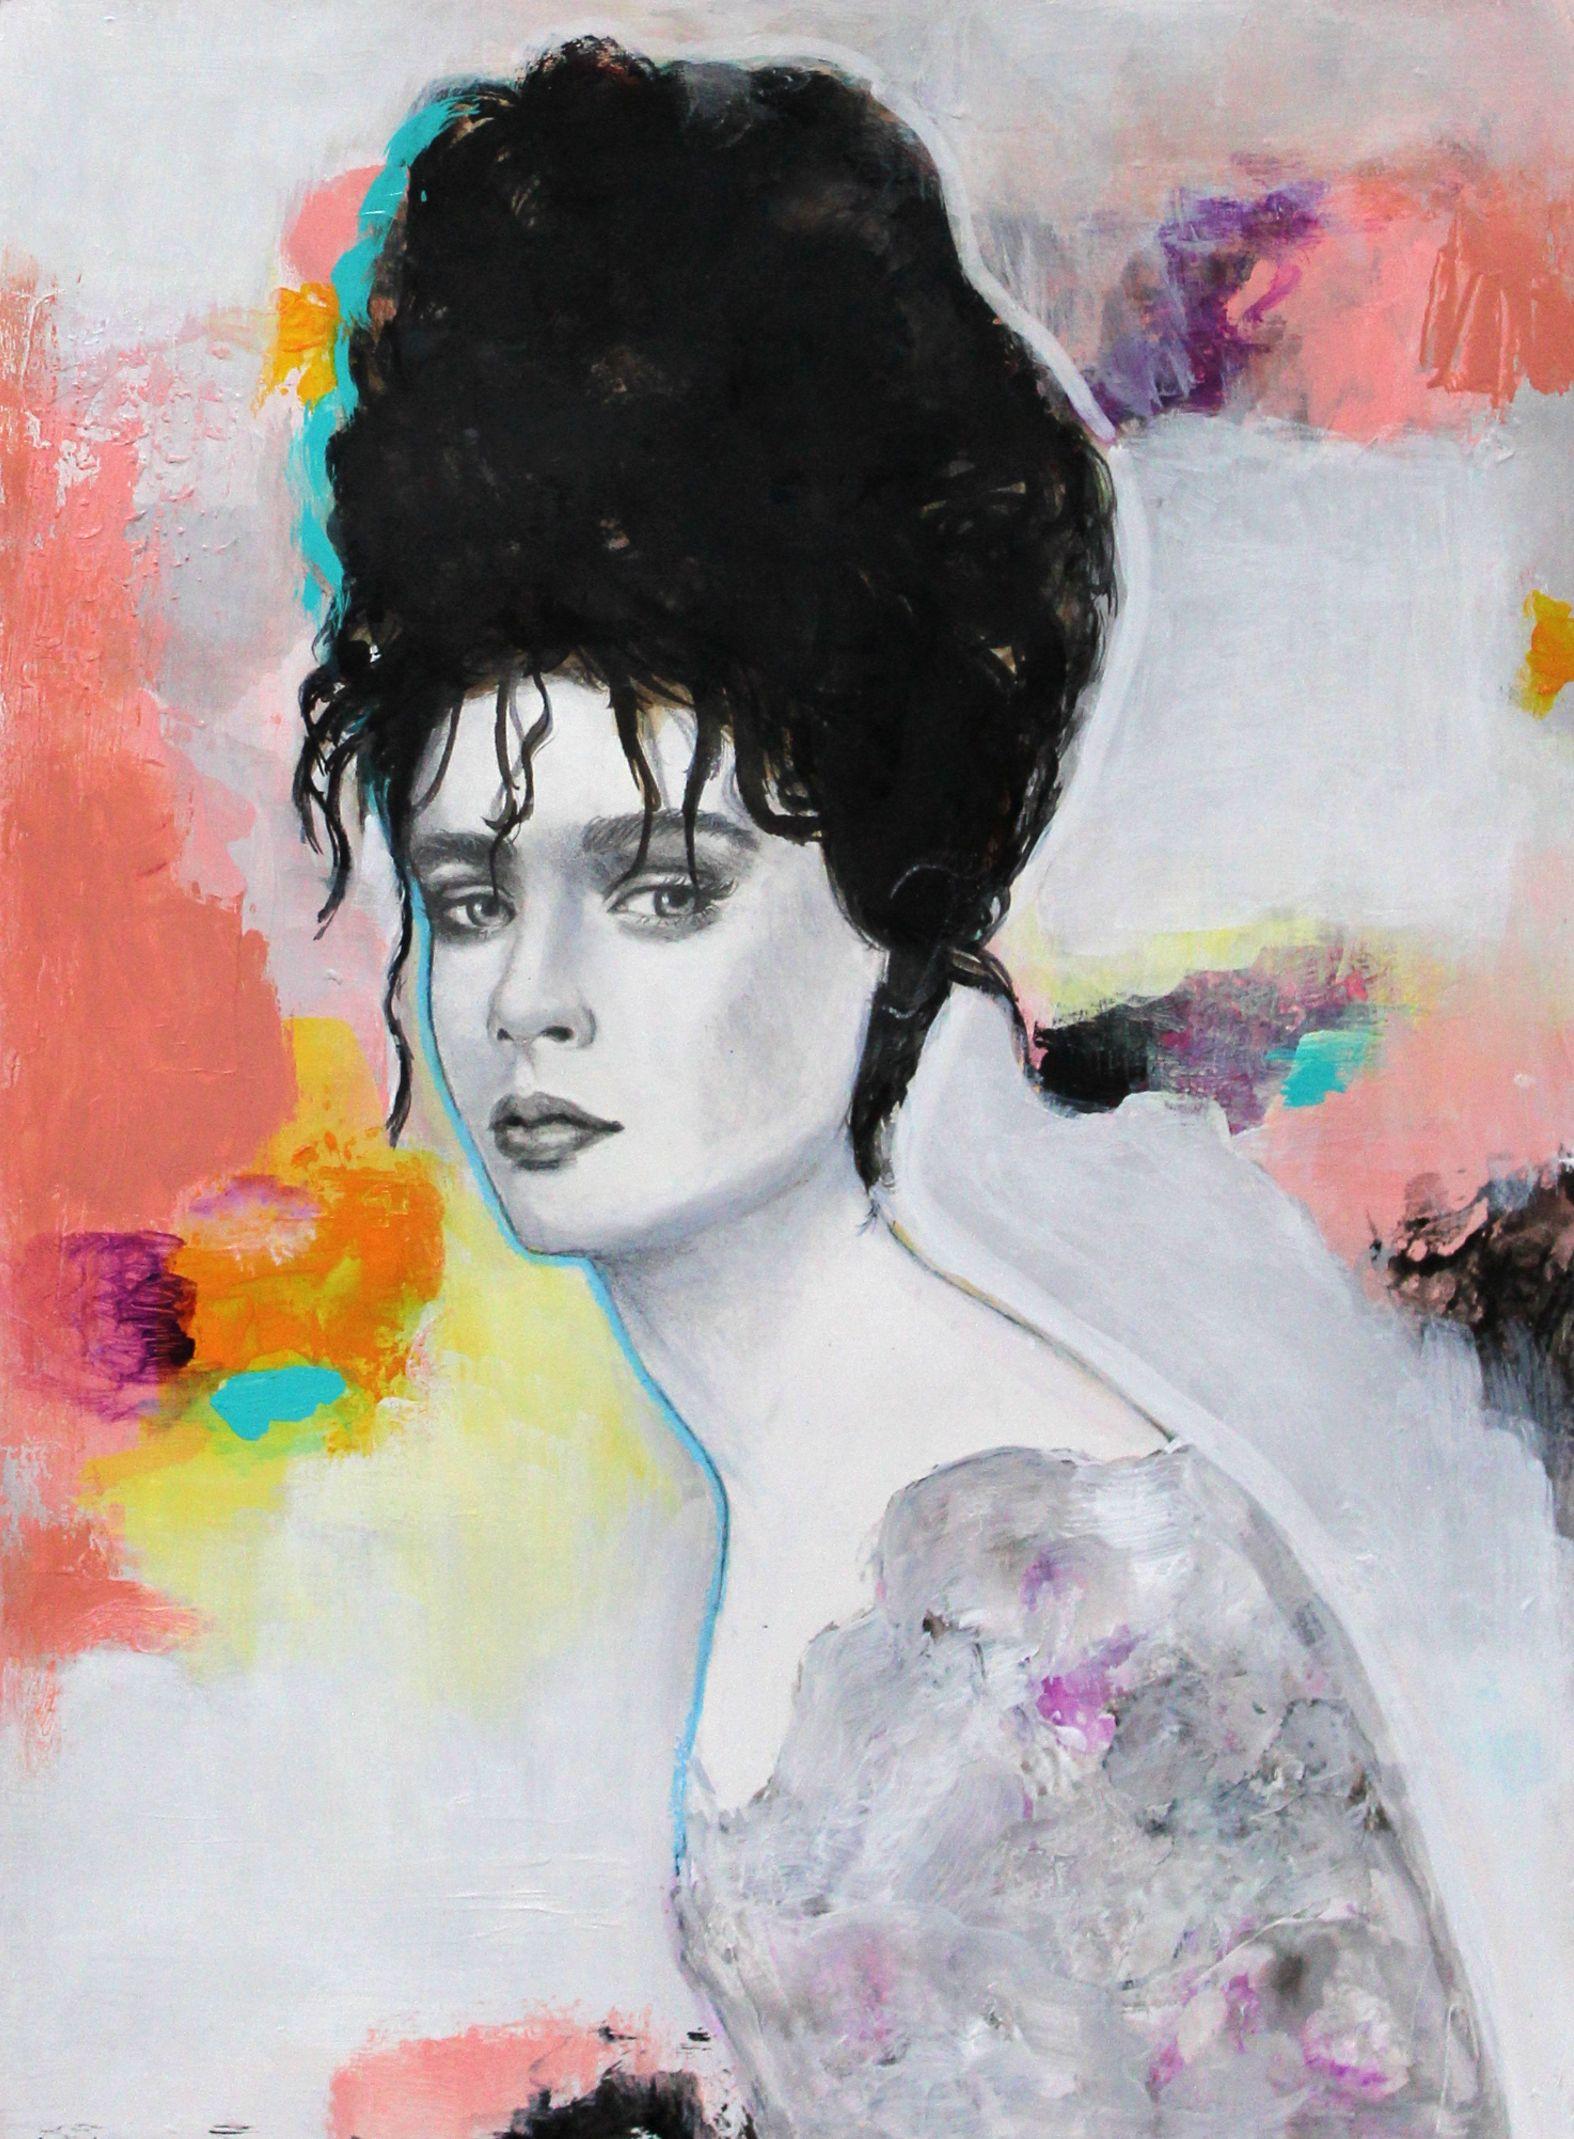 Her No. 28, Mixed Media on Paper - Mixed Media Art by Haydee Torres